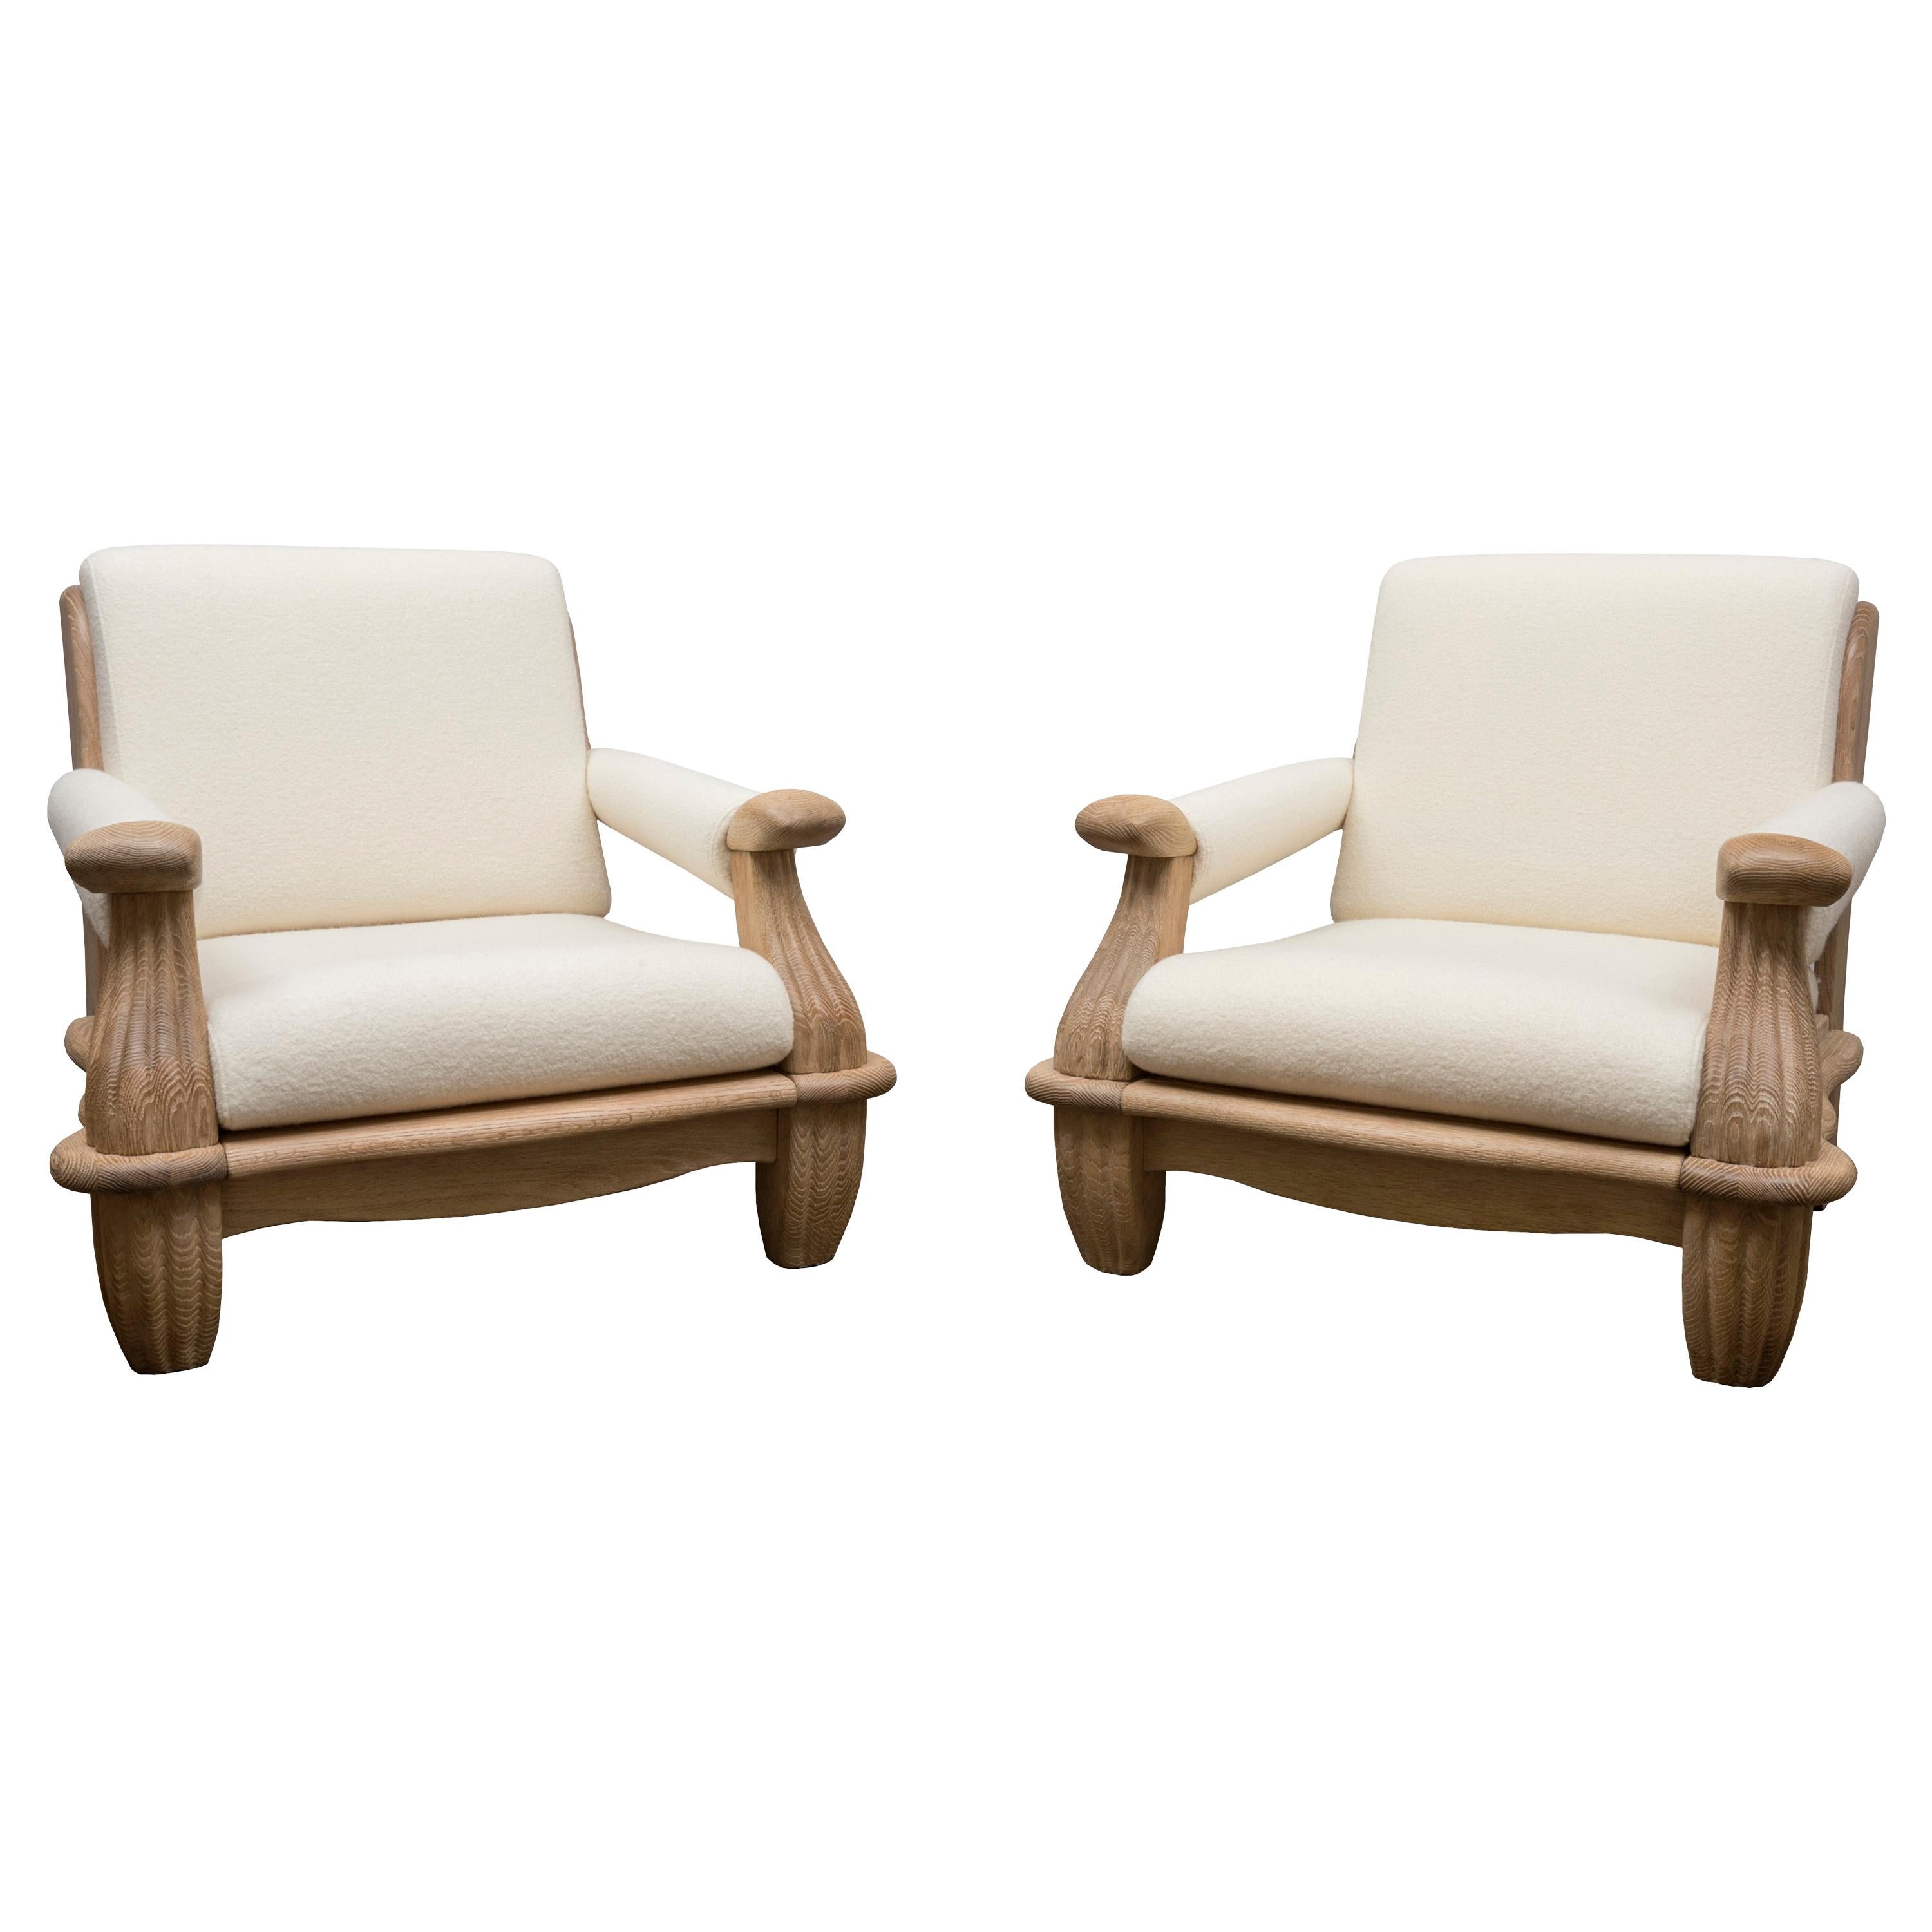 Pair of Large Oak Lounge Chairs, France, circa 1950